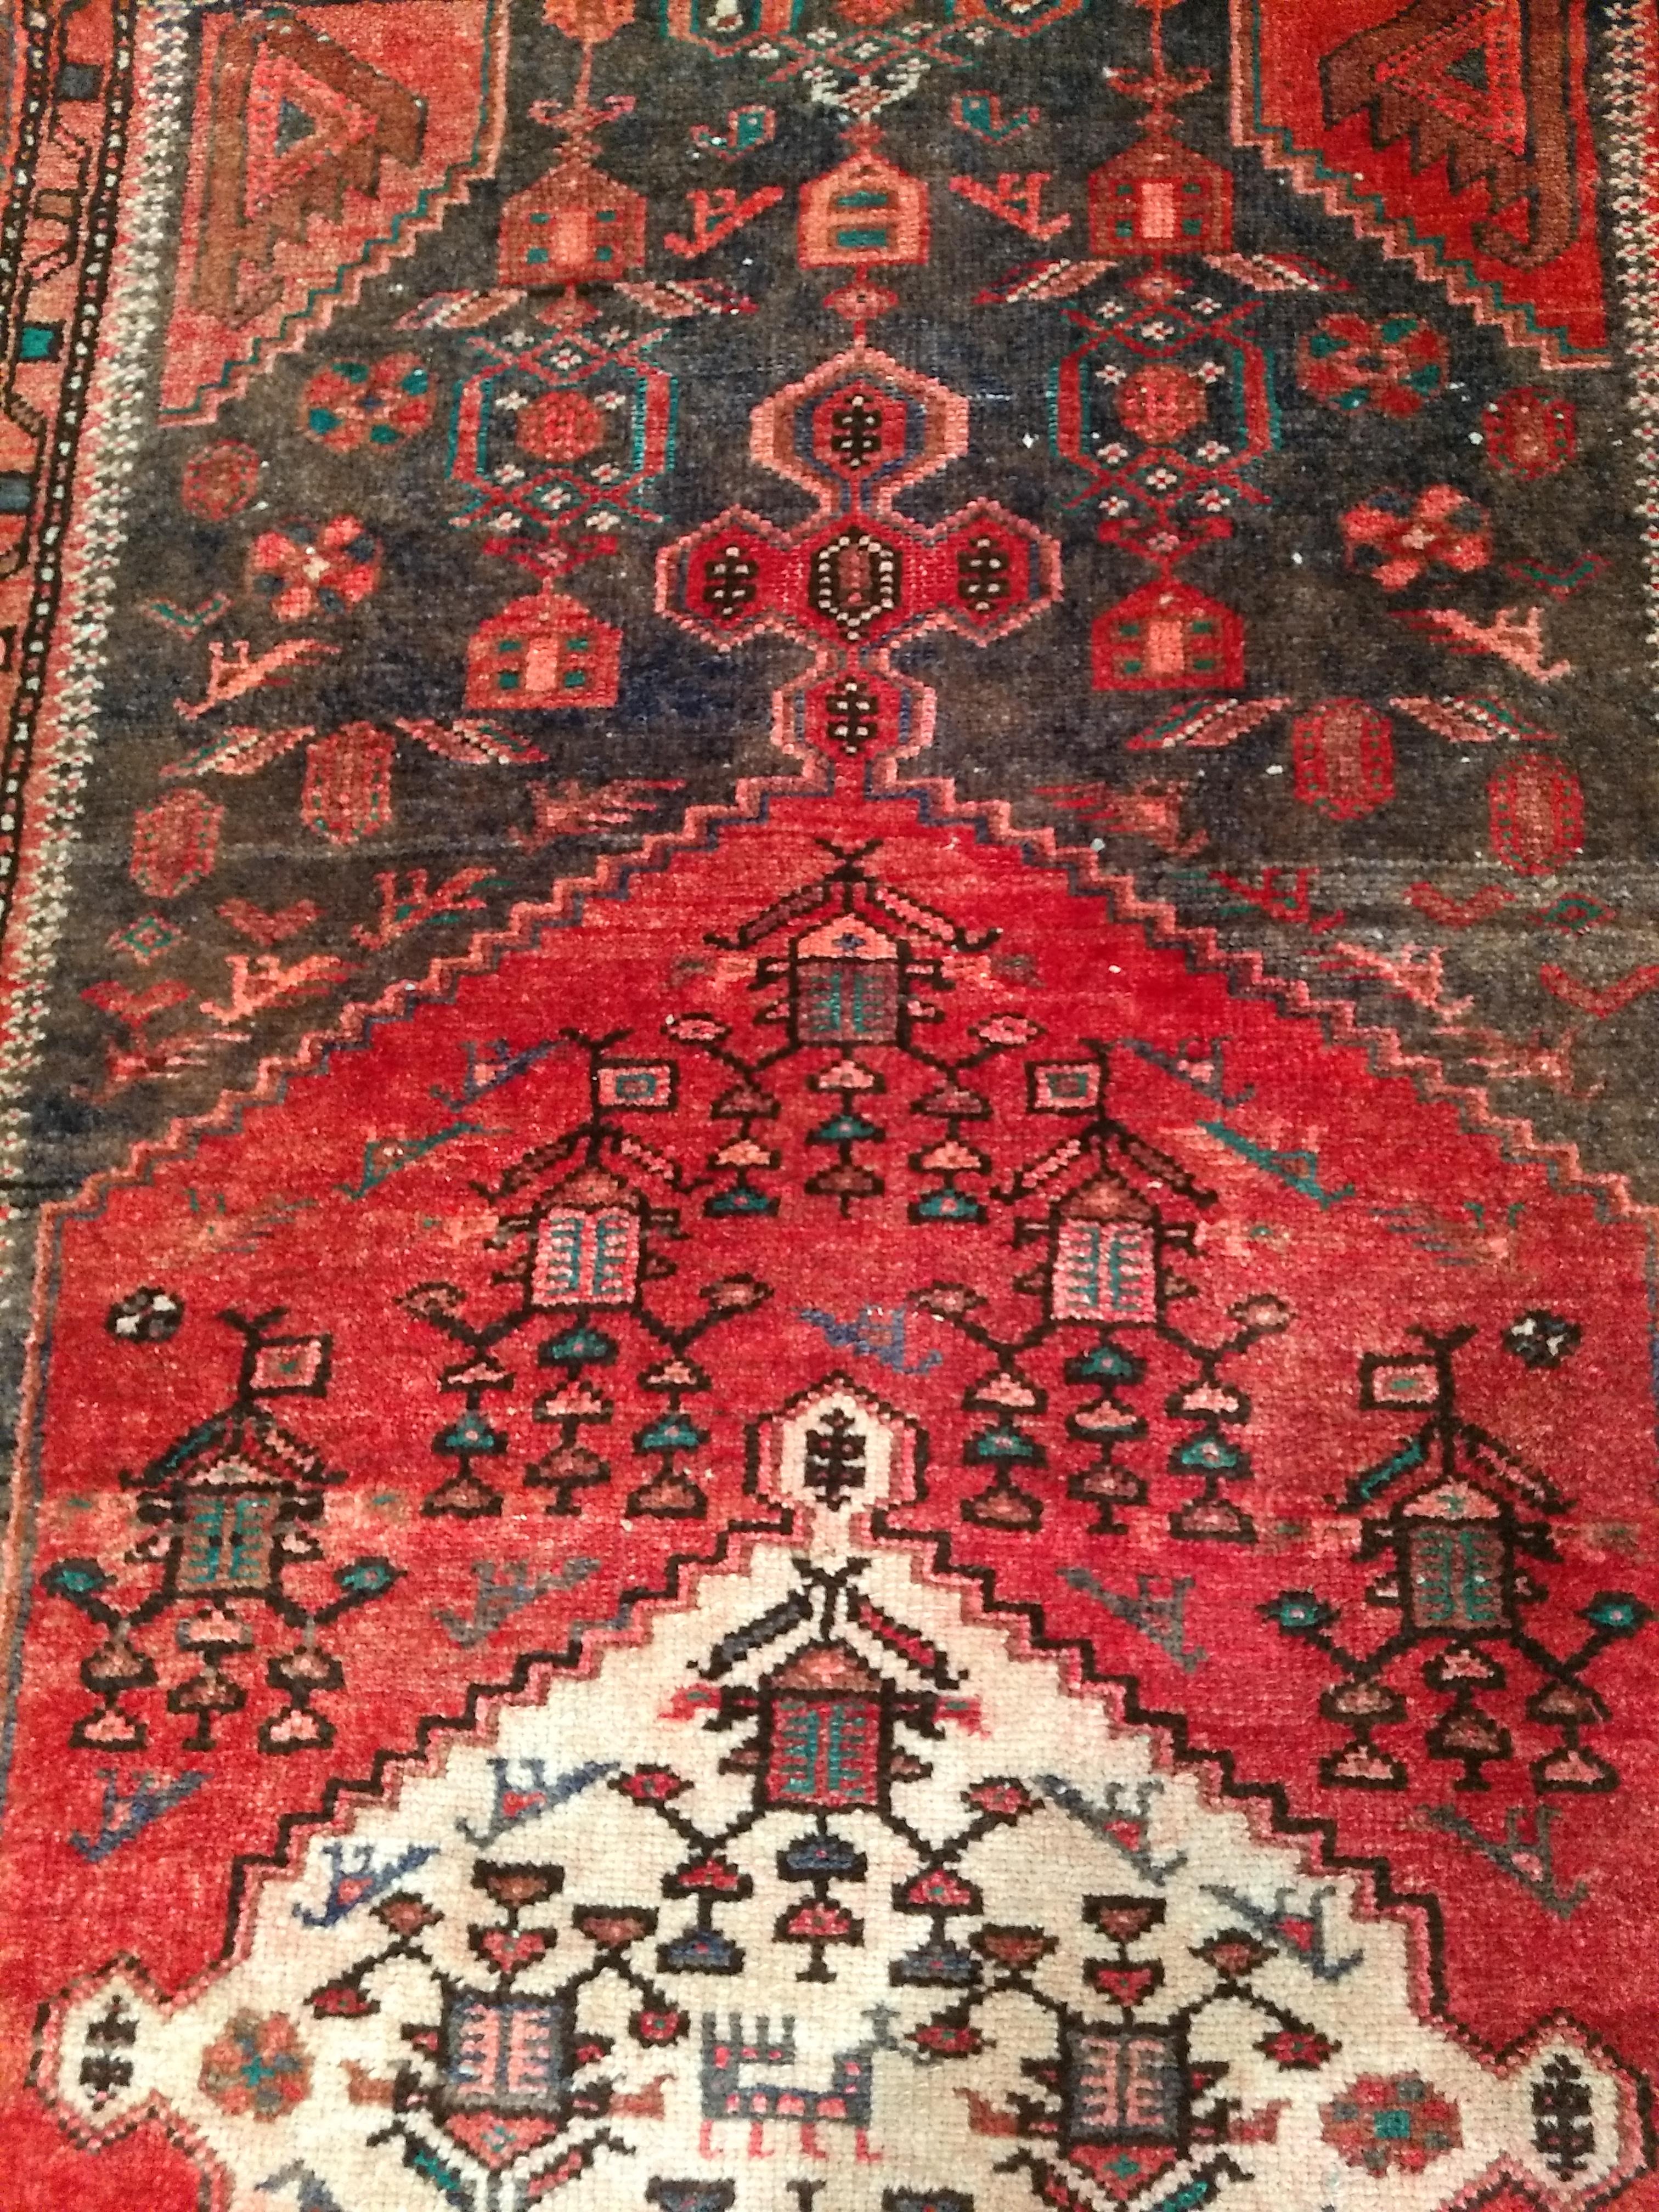 A beautiful hand woven Persian Hamadan area rug in medallion pattern in moss green, red, ivory, and gray colors from the 2nd quarter of the 1900s. The overall design of the rug is considered “tribal” or “rustic”. The rug has a central medallion in a